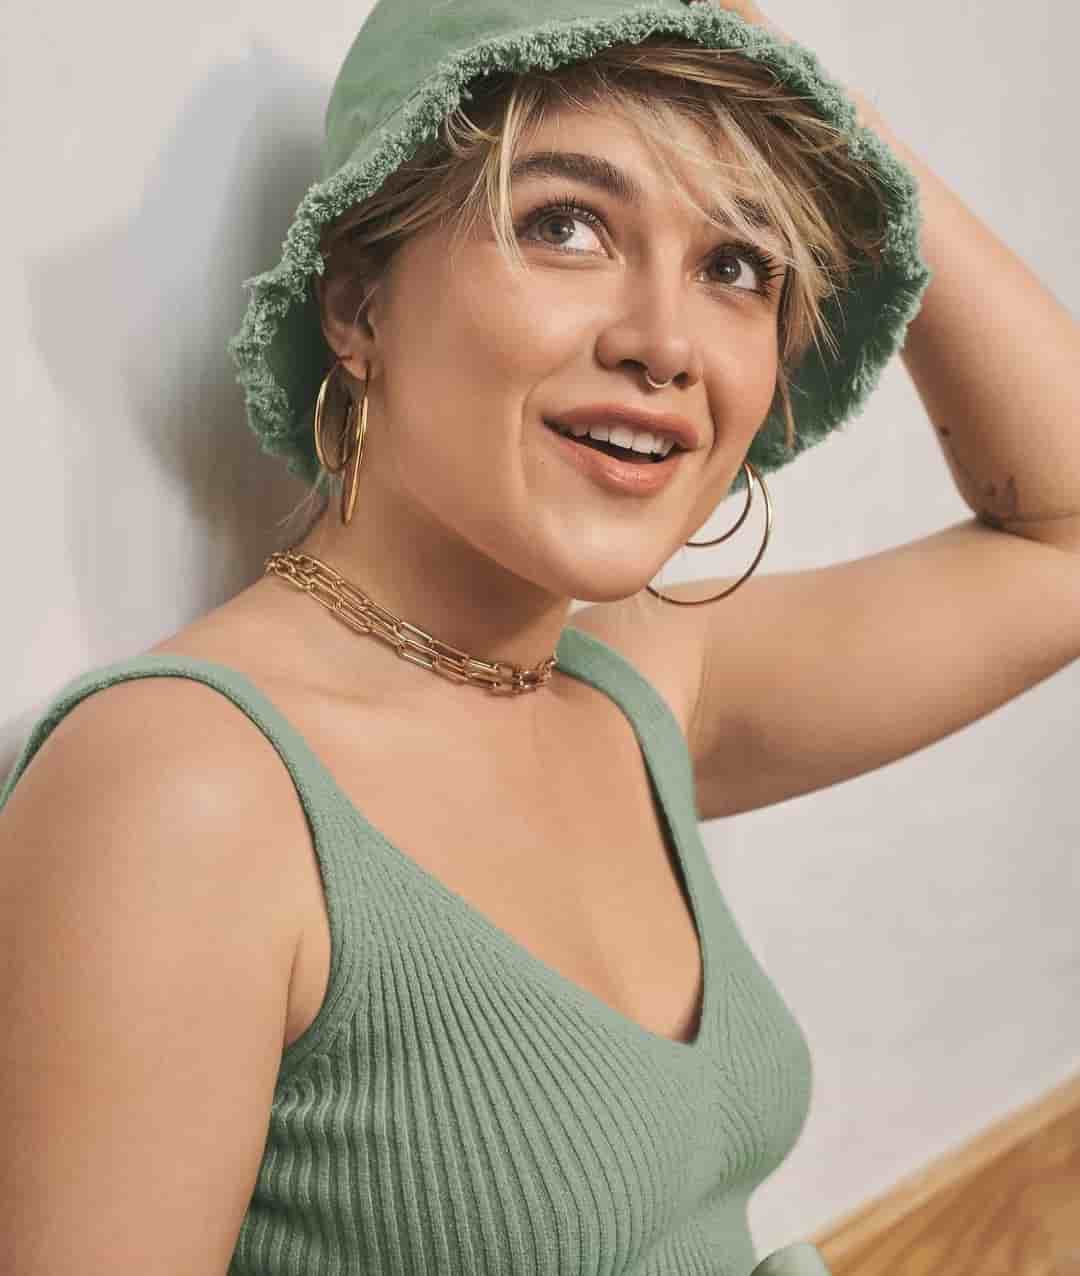 Florence Pugh Net Worth, Age, Family, Boyfriend, Biography, and More